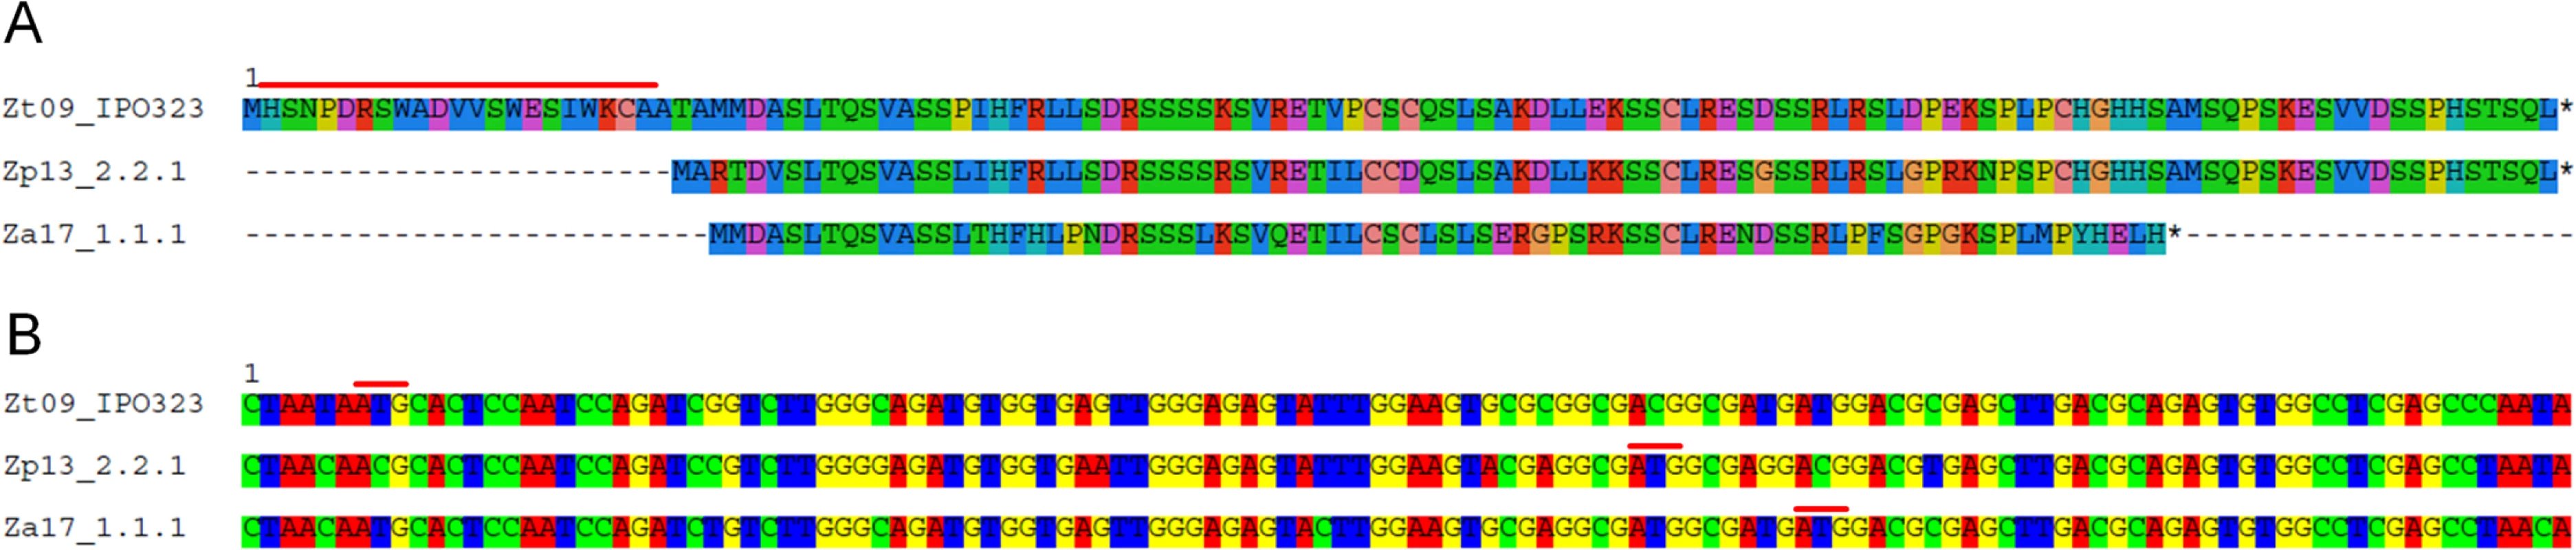 Variation at the nucleotide and protein levels between orthologs of <i>Zt80707</i>.